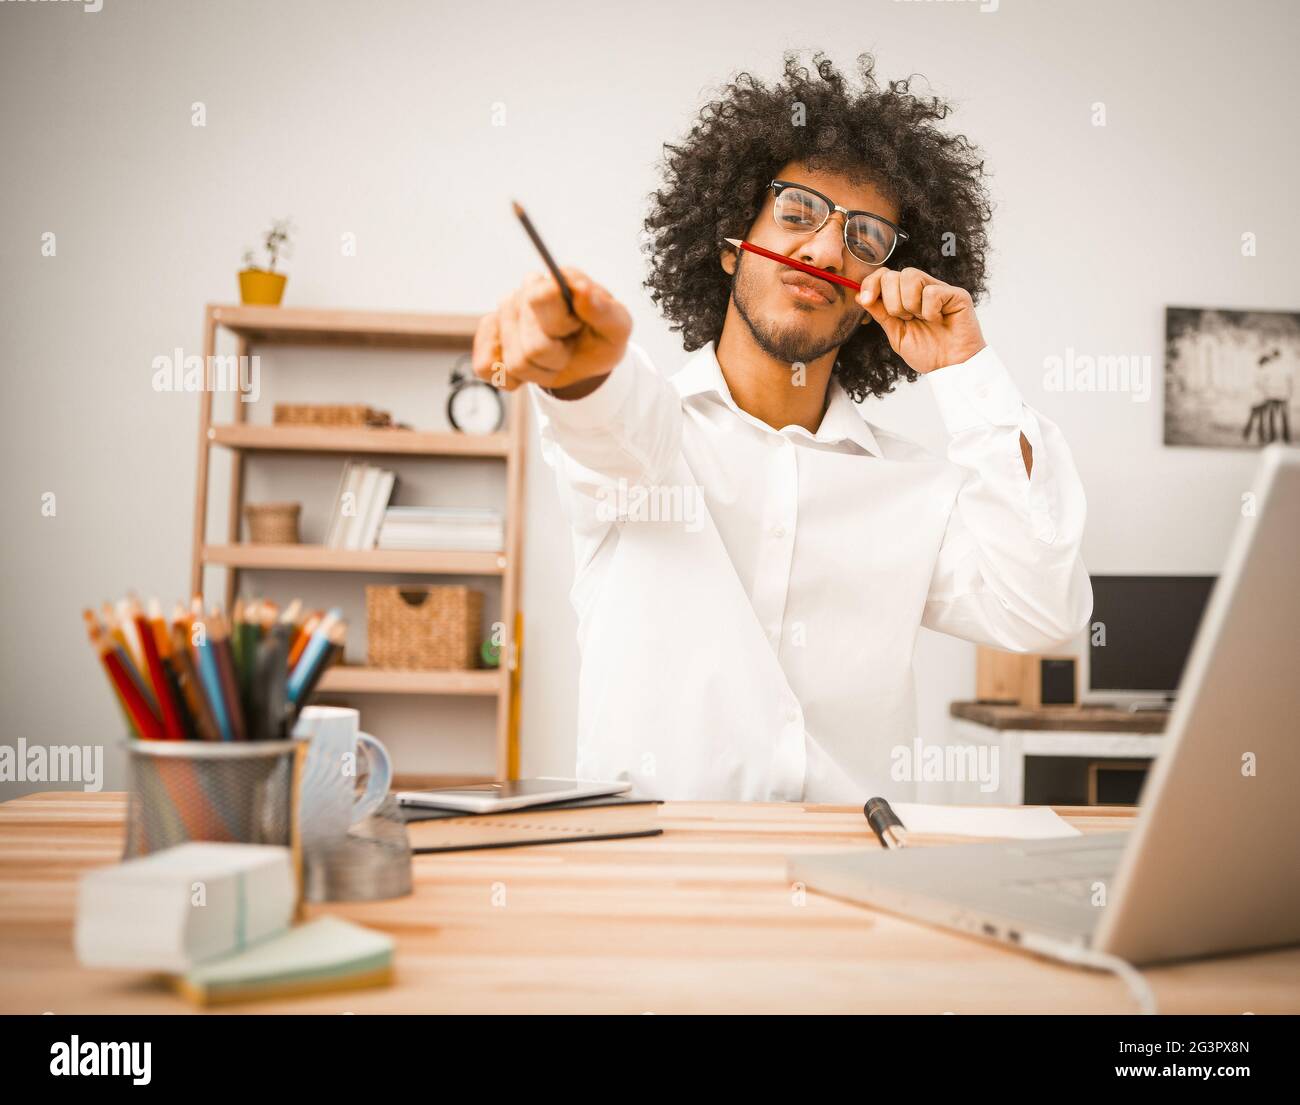 Creative man takes a break from work. Millennial guy having fun making a mustache by applying a pencil under his nose.businessma Stock Photo